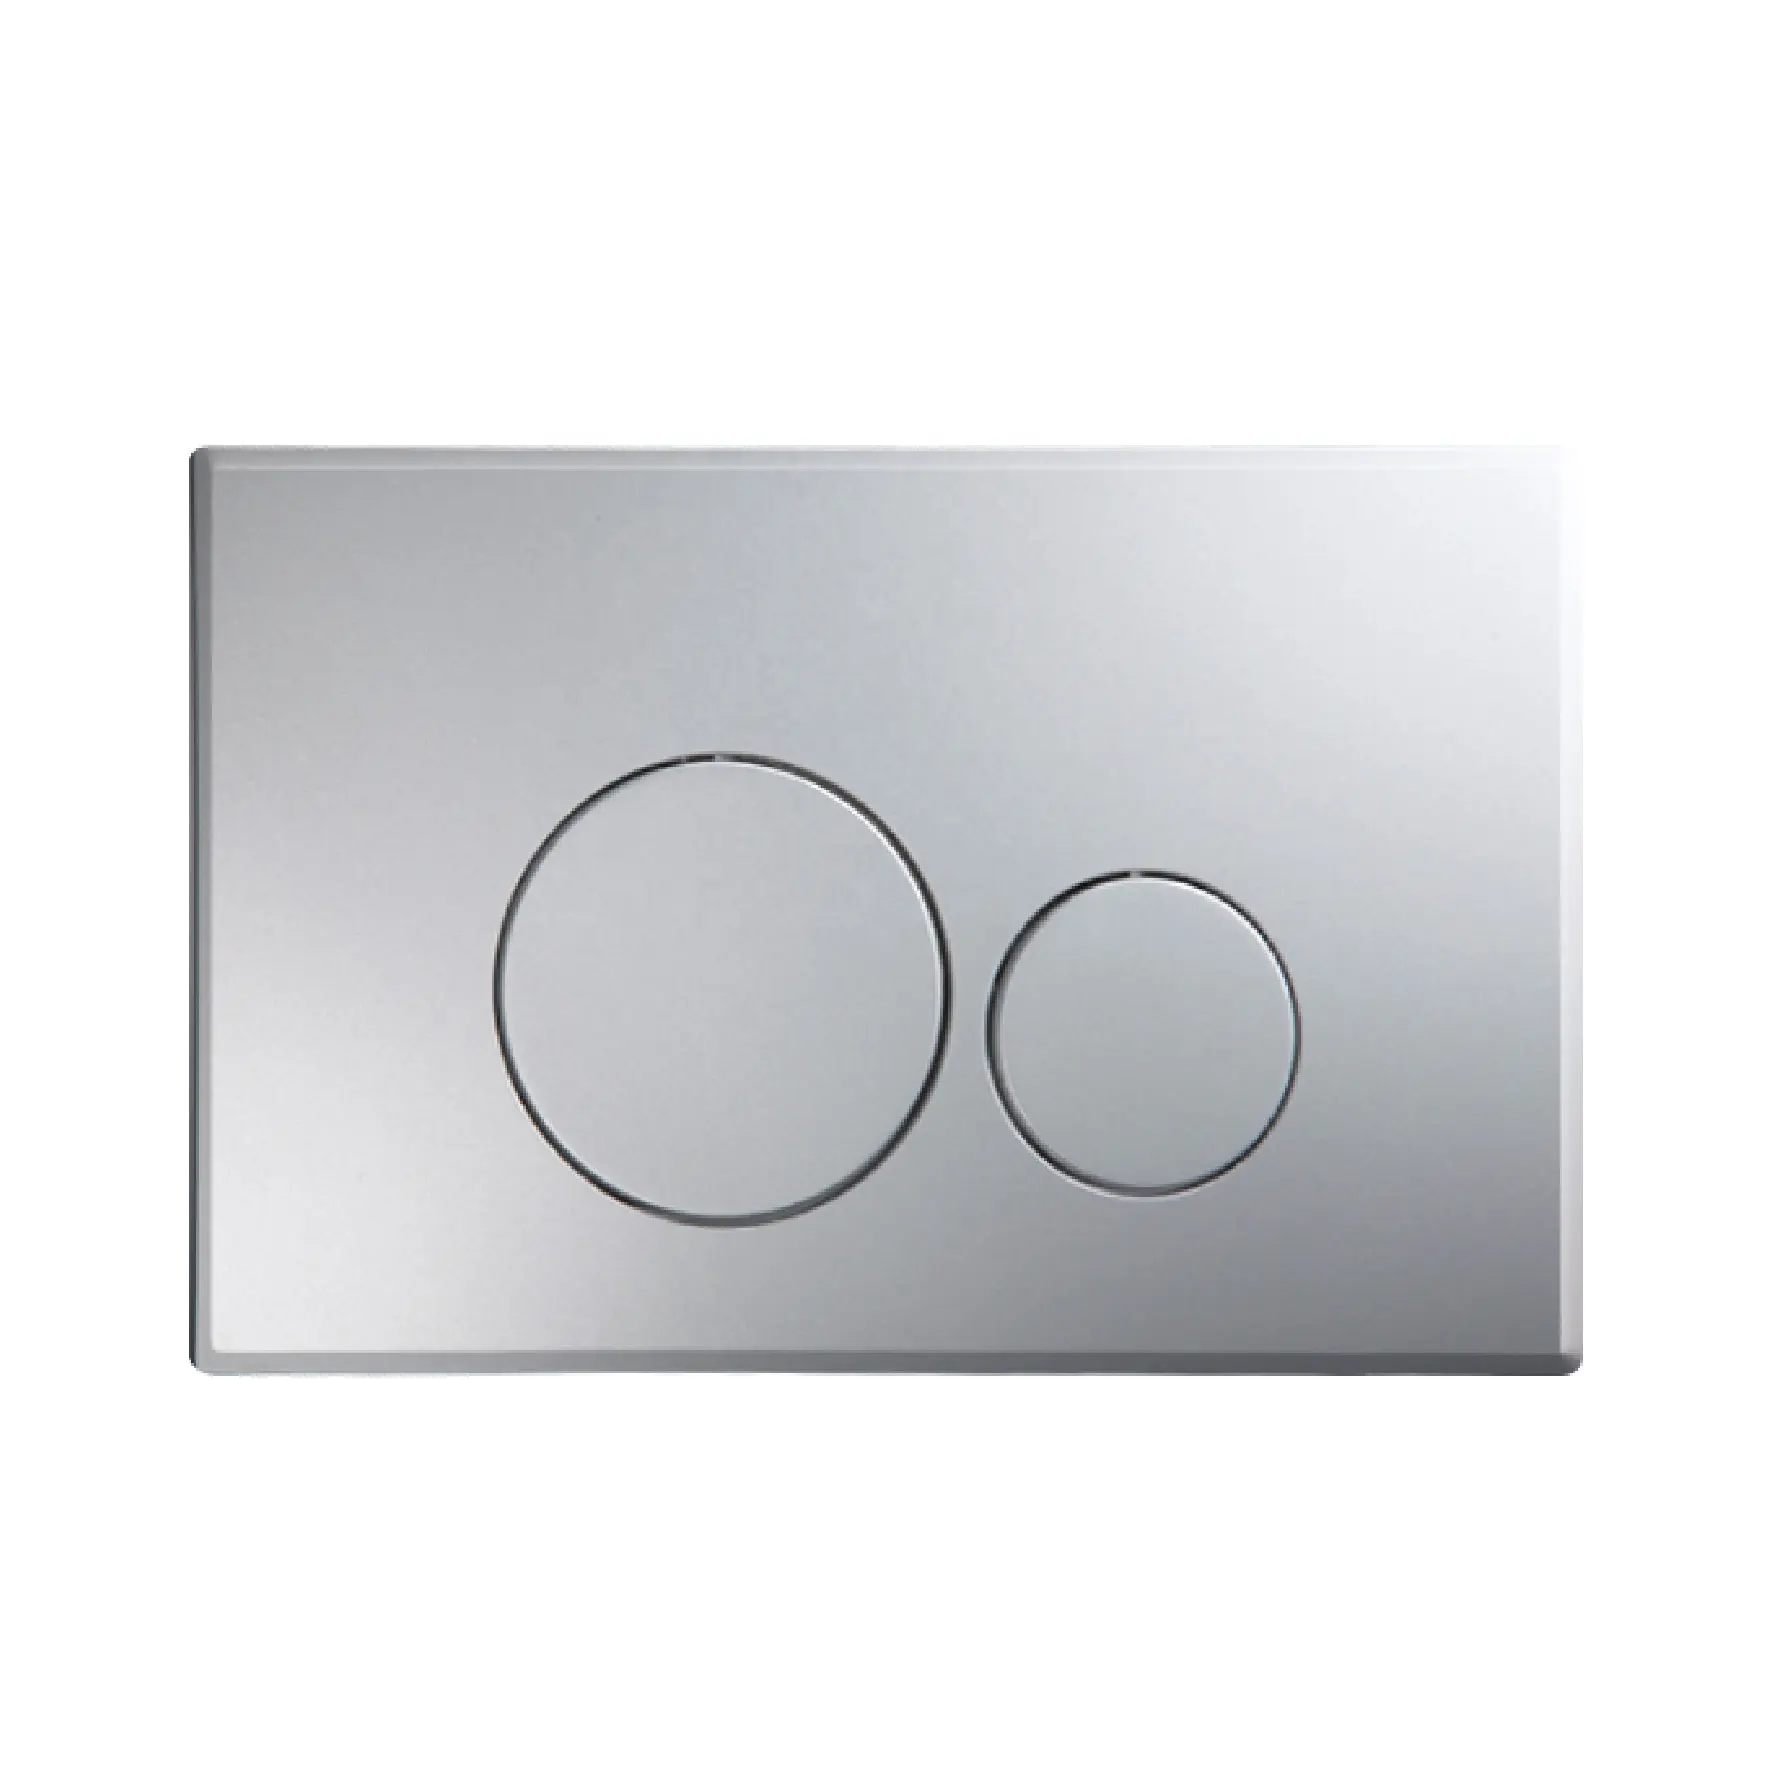 Concealed Cistern Flush Plate Supplier Of Geberit Tece Toto Wdi Type In Wall Cistern Push Plate